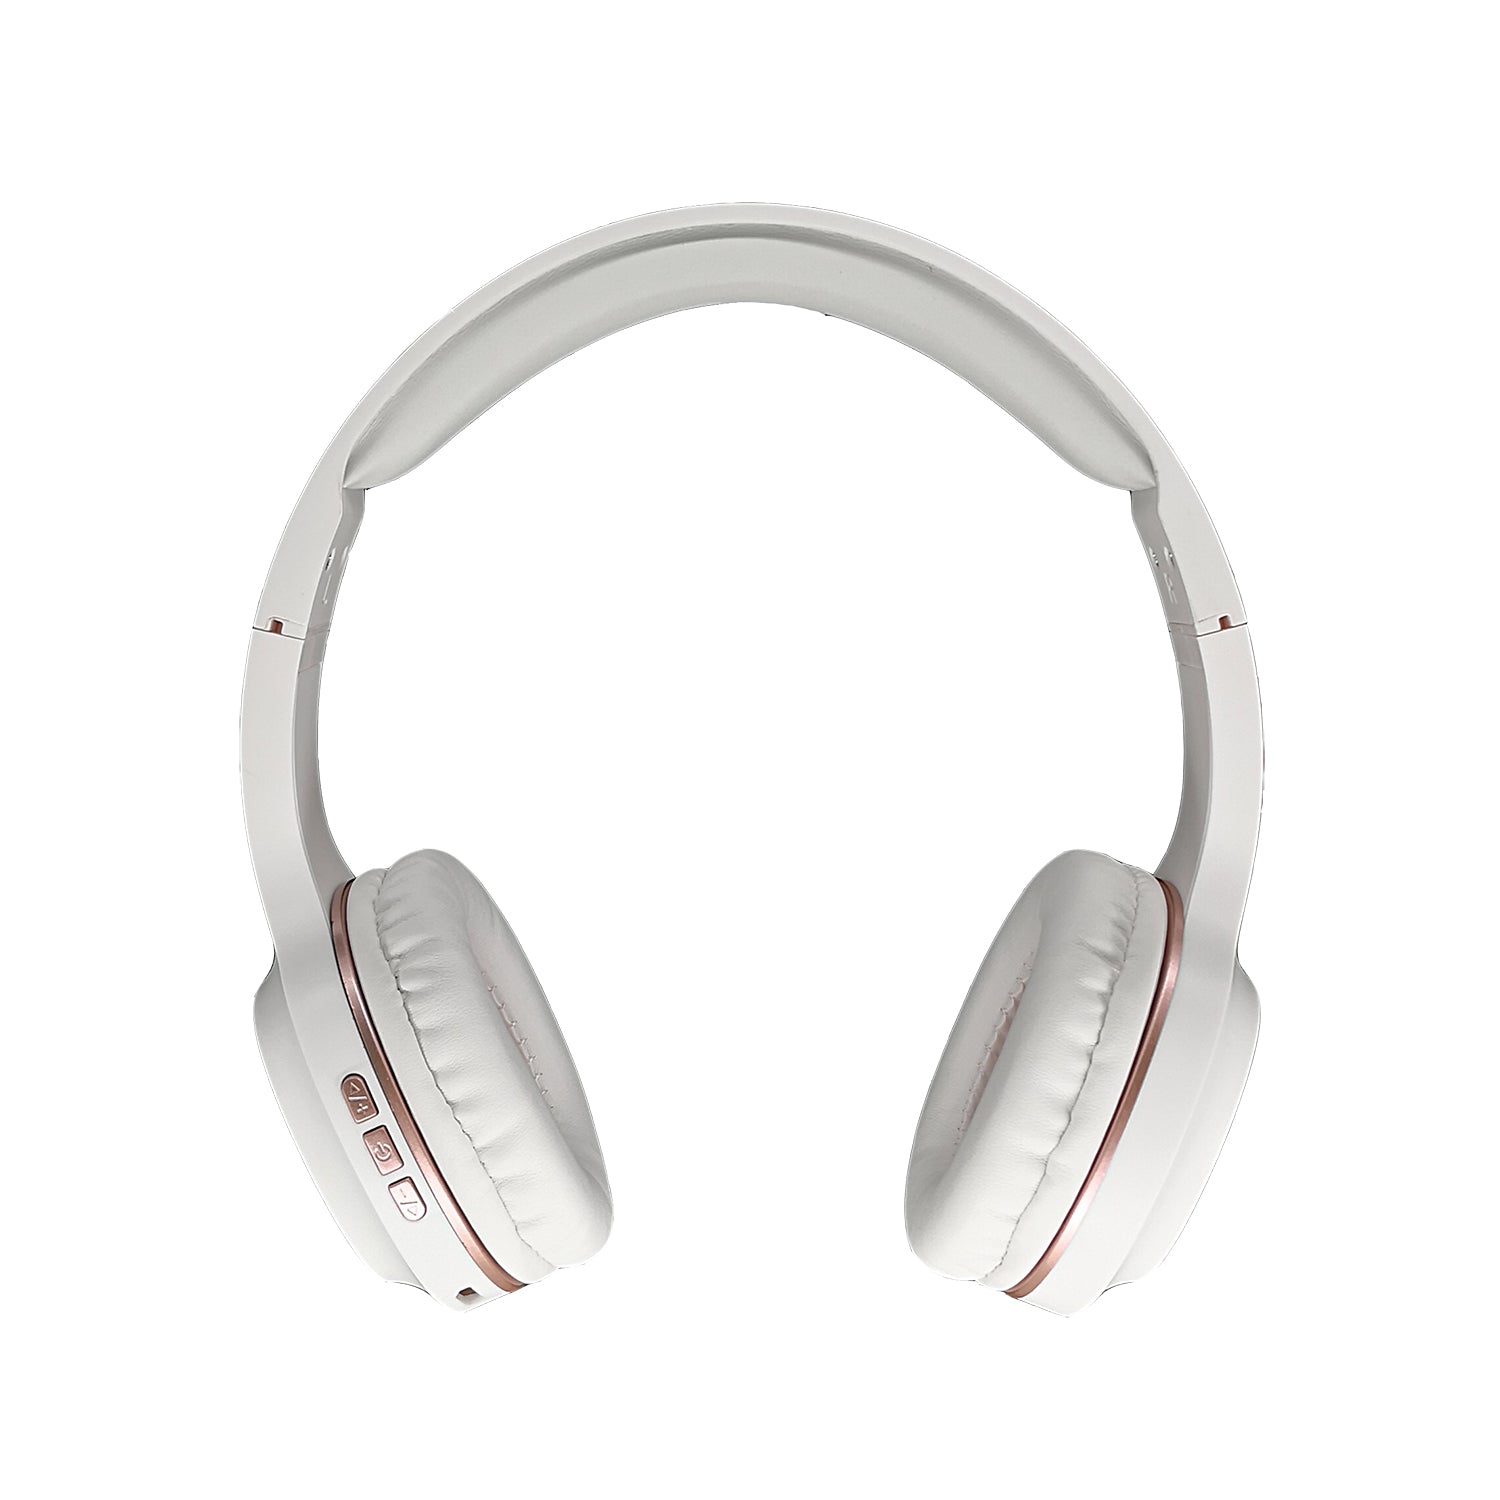 Photo of Morpheus 360 Tremors Wireless on-ear Headphones – White with Rose Gold accents, front view displays Power on/off button, Volume up/down, and track forward/backward buttons.